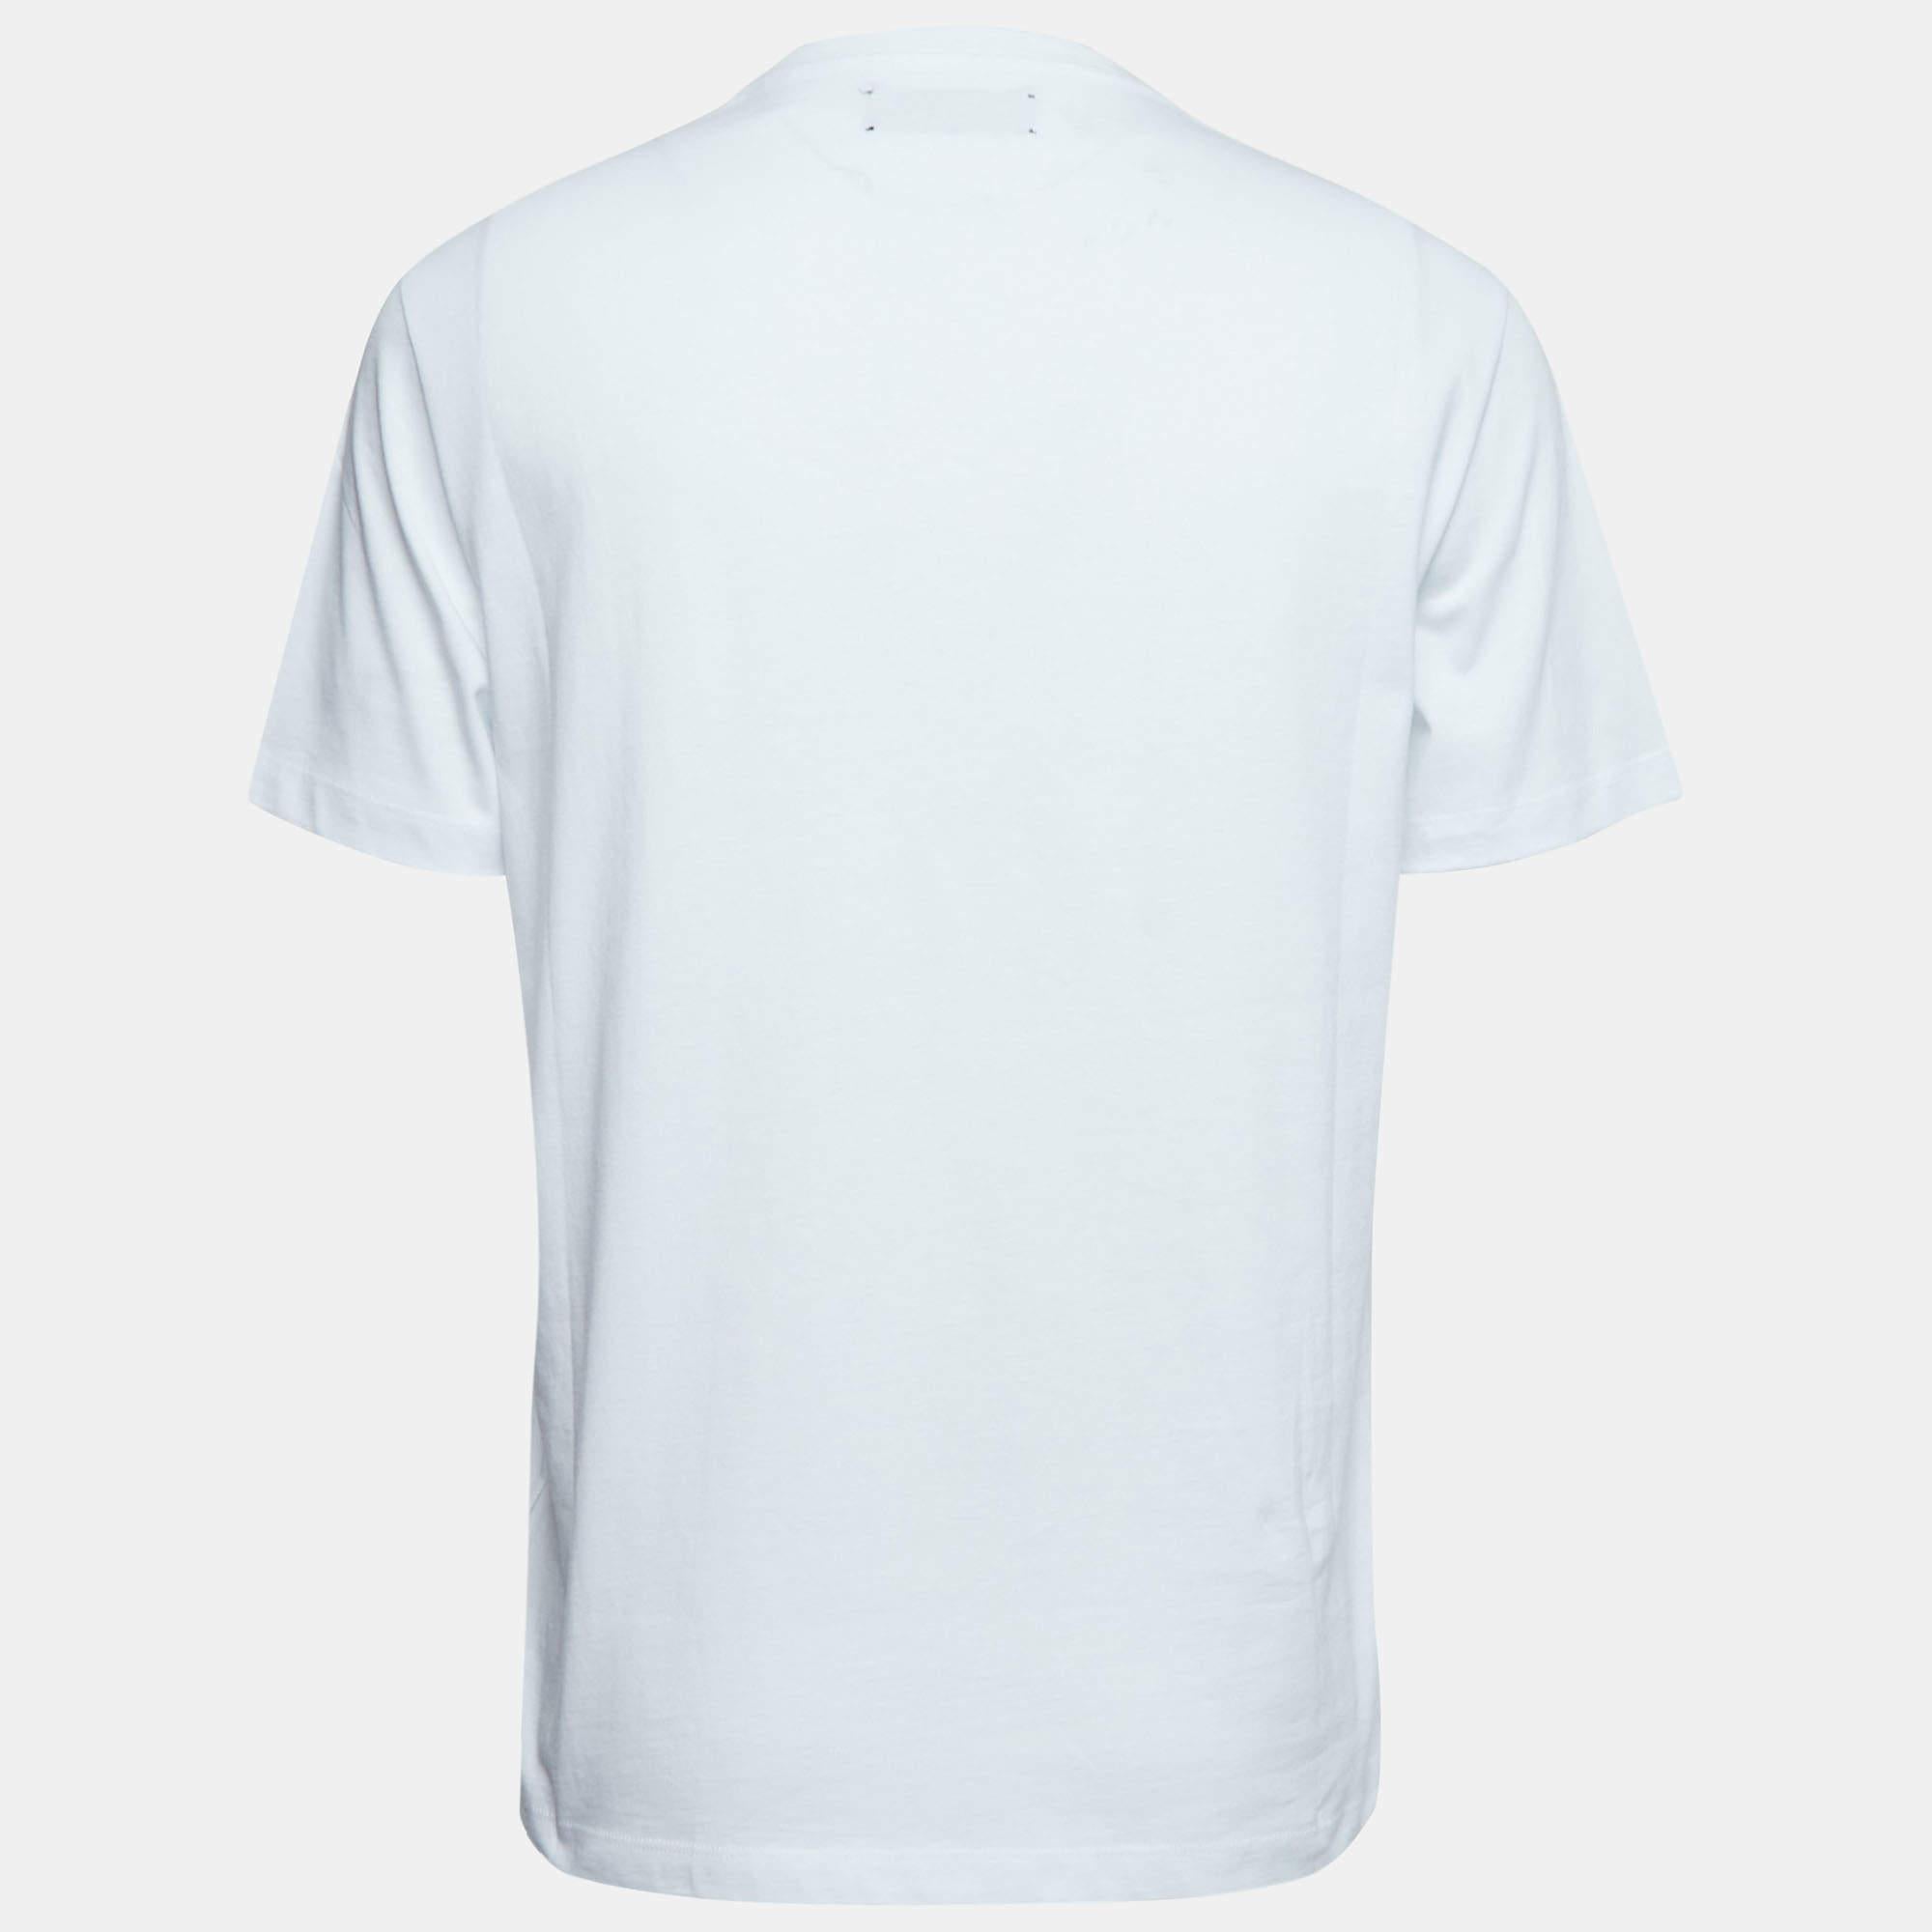 Get the comfort and the right casual style with this designer T-shirt. Designed to be reliable and durable, the creation has a simple neckline and signature detailing.

